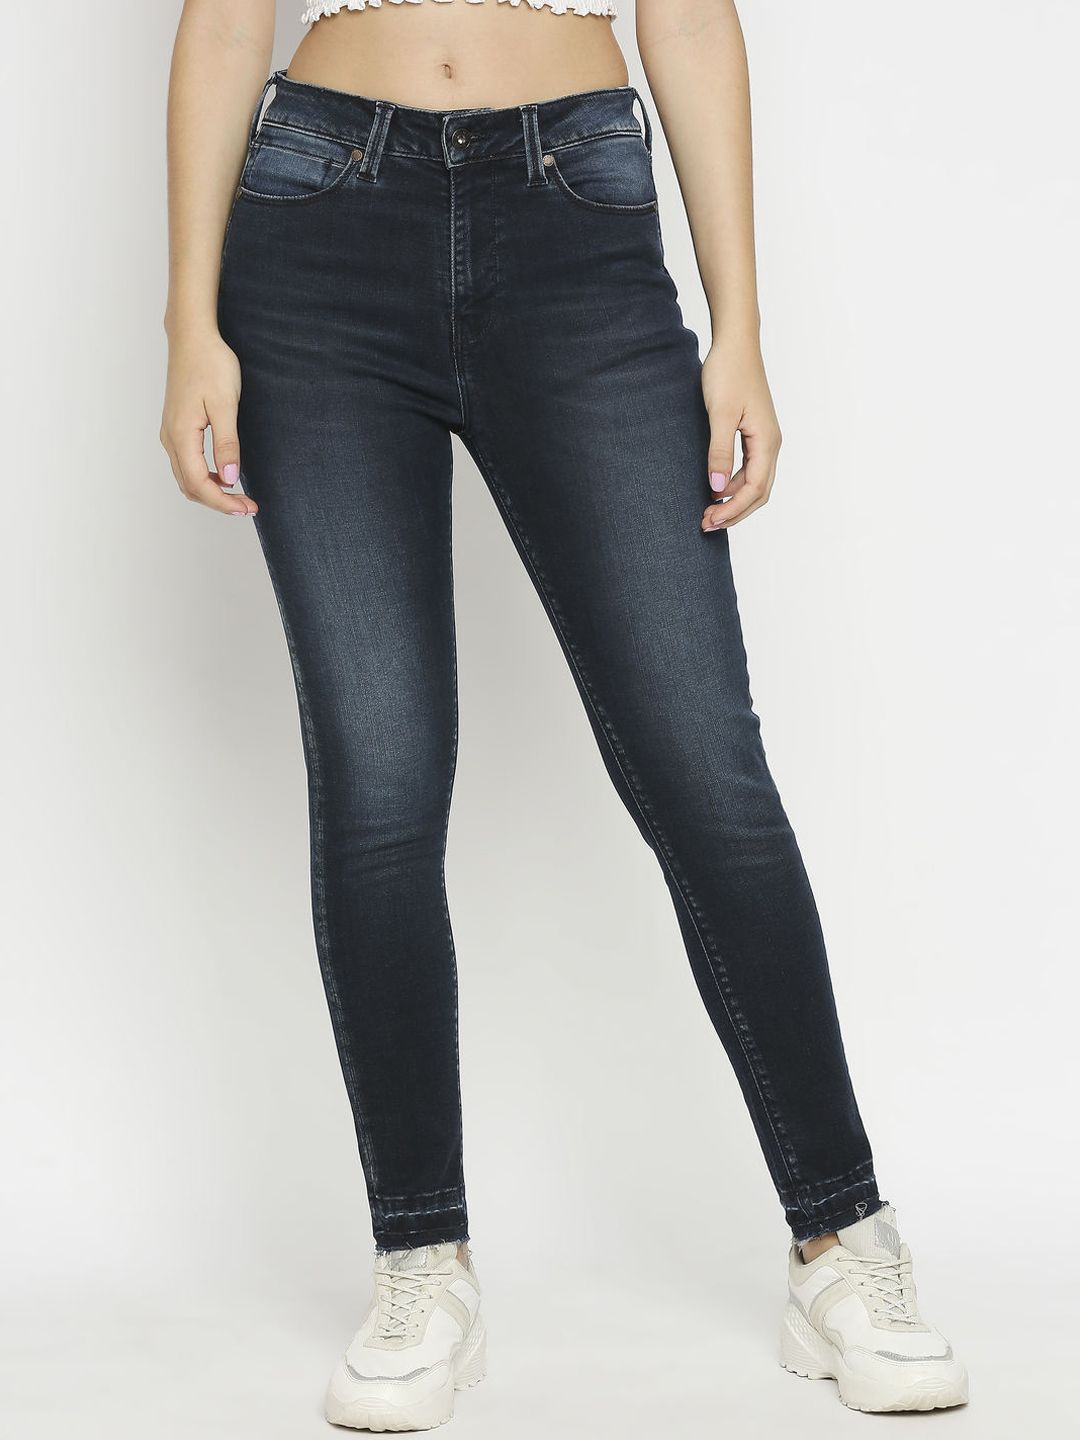 Pepe Jeans Women Navy Blue Skinny Fit High-Rise Light Fade Jeans Price in India